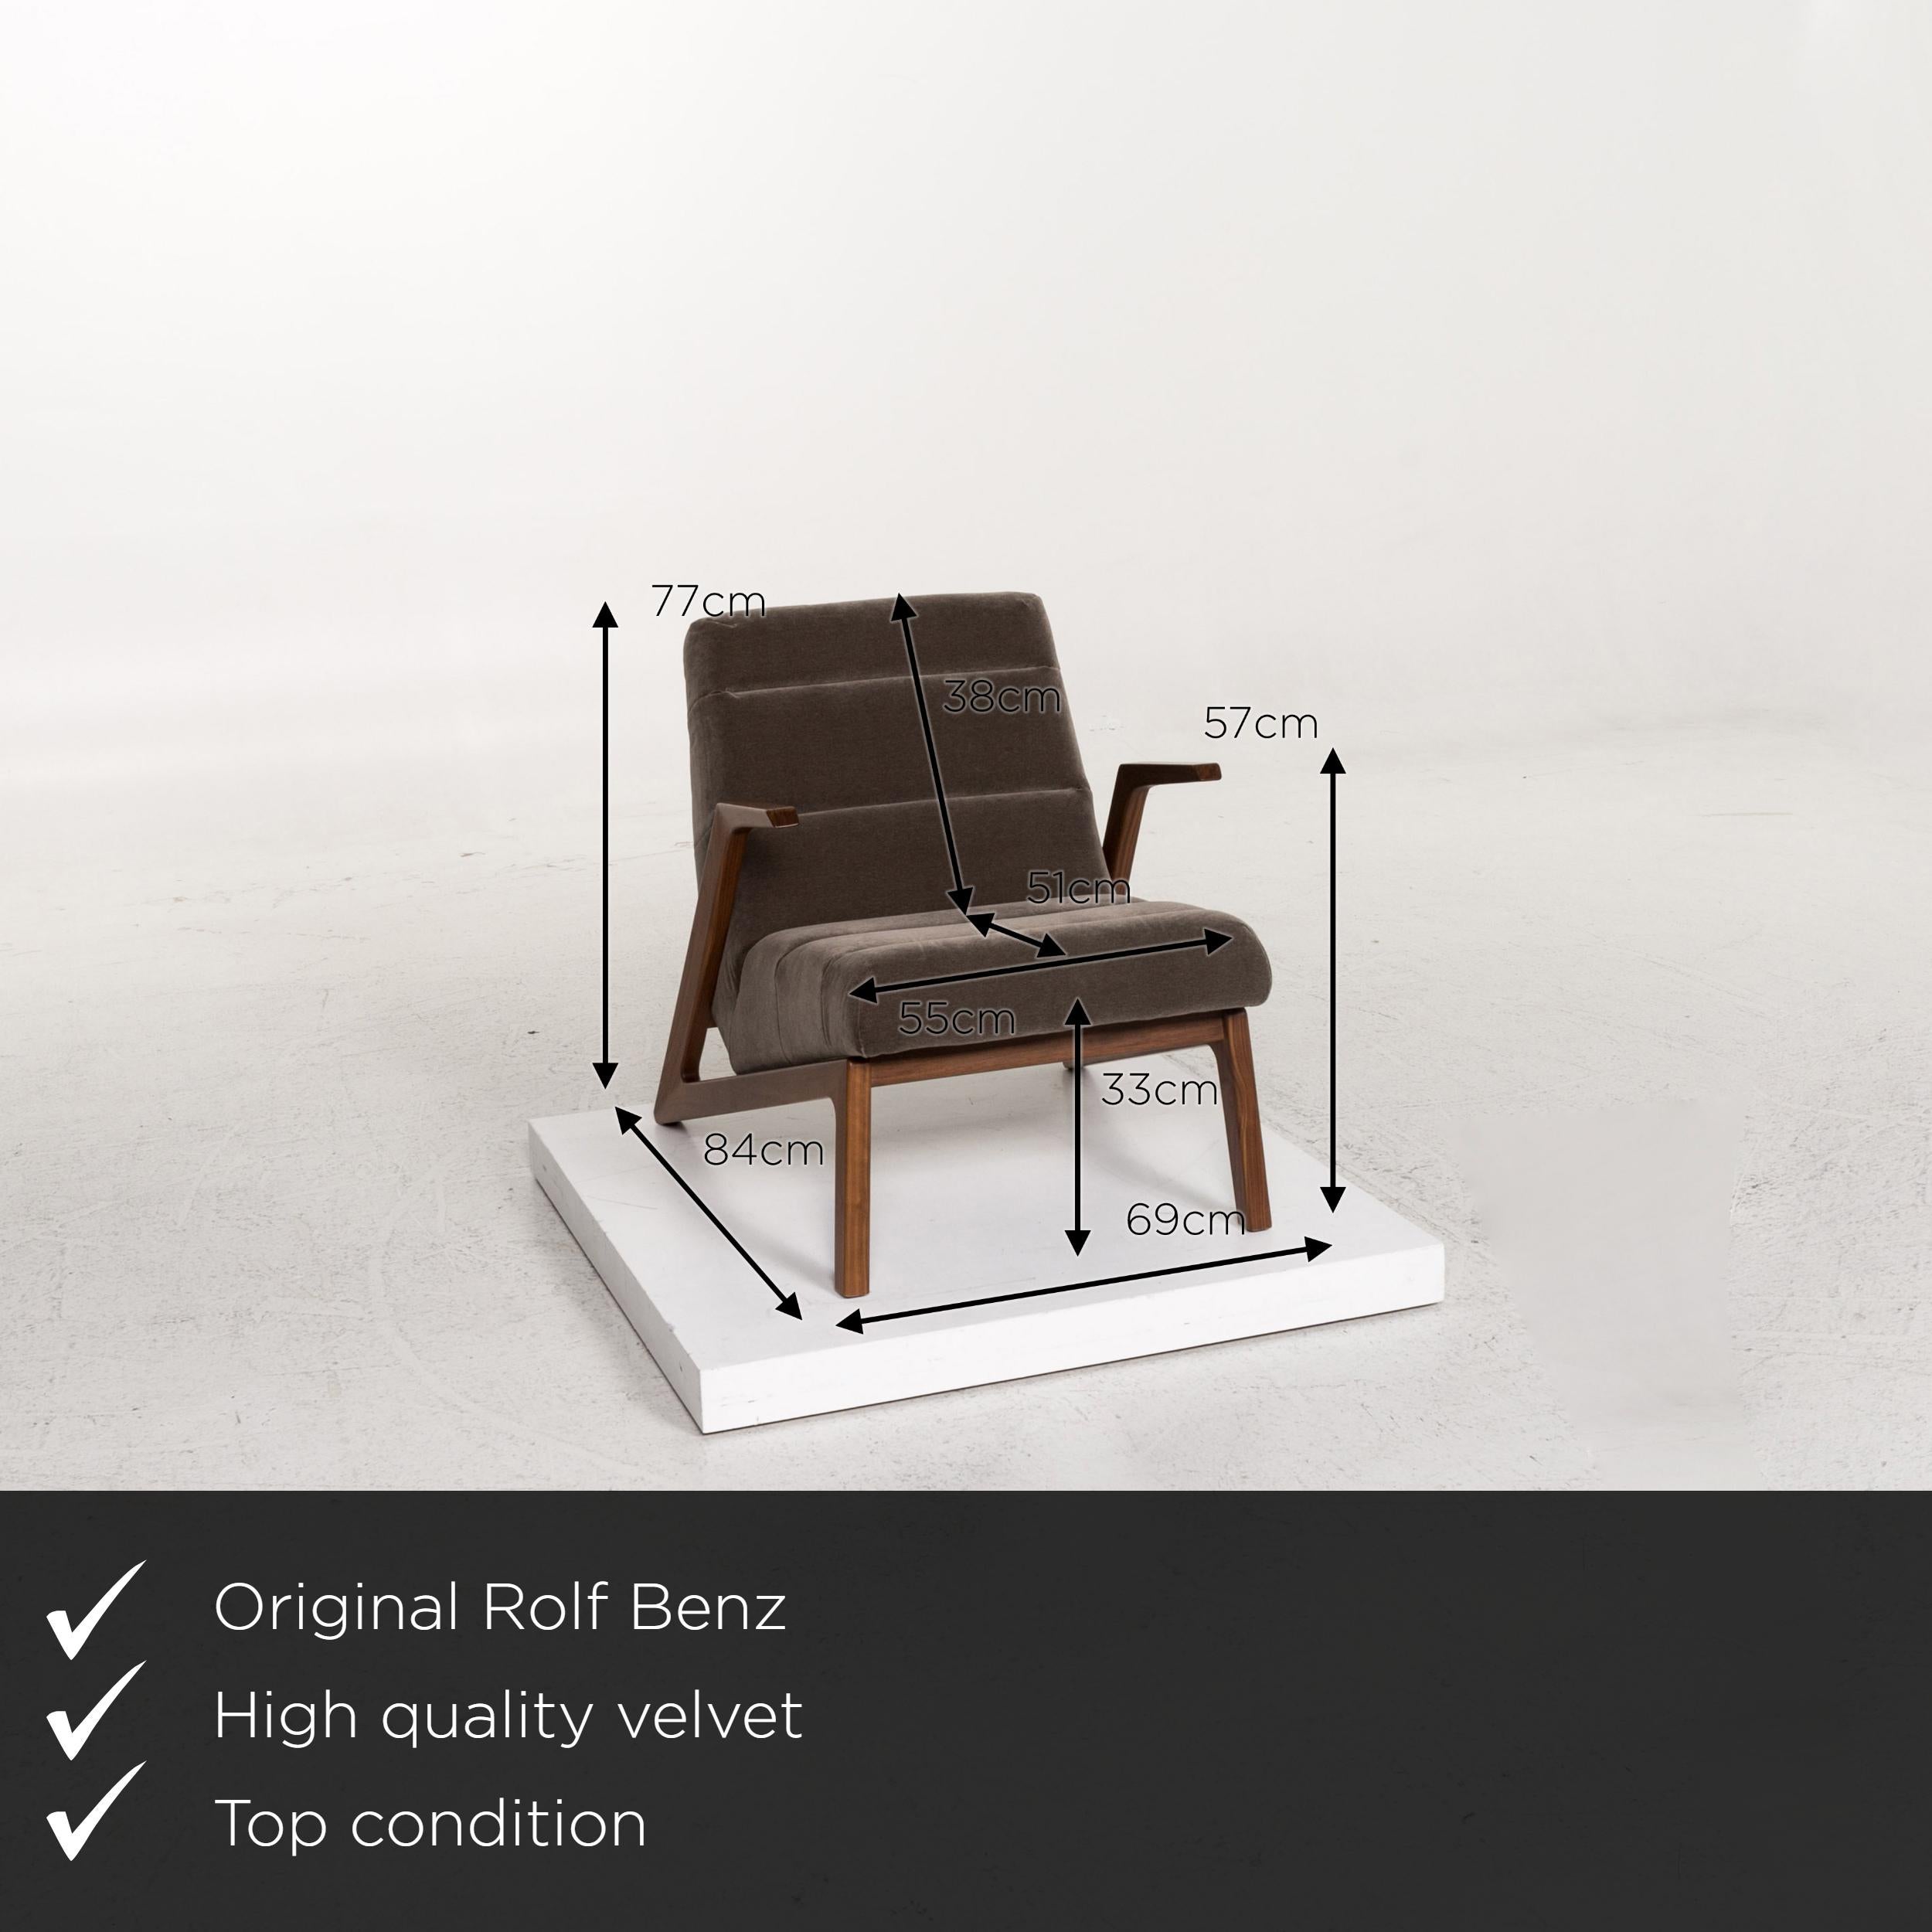 We present to you a Rolf Benz 580 velvet fabric armchair gray set 2 armchair.
    
 

 Product measurements in centimeters:
 

Depth 84
Width 69
Height 77
Seat height 33
Rest height 57
Seat depth 51
Seat width 55
Back height 38.